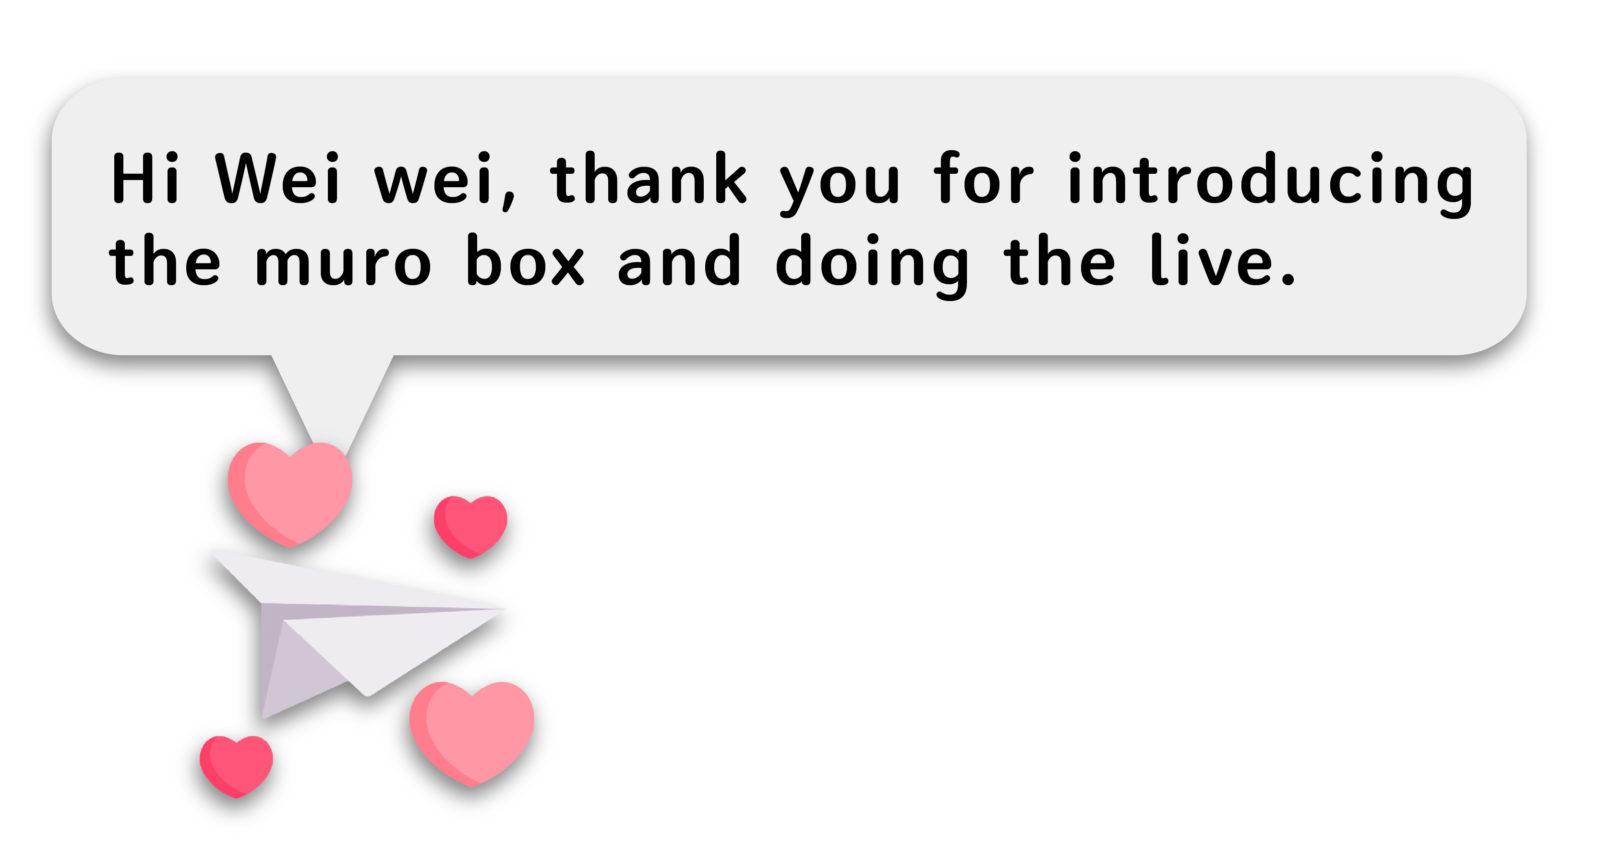 Hi Wei Wei, thank you for introducing the Muro box and doing the live streaming.